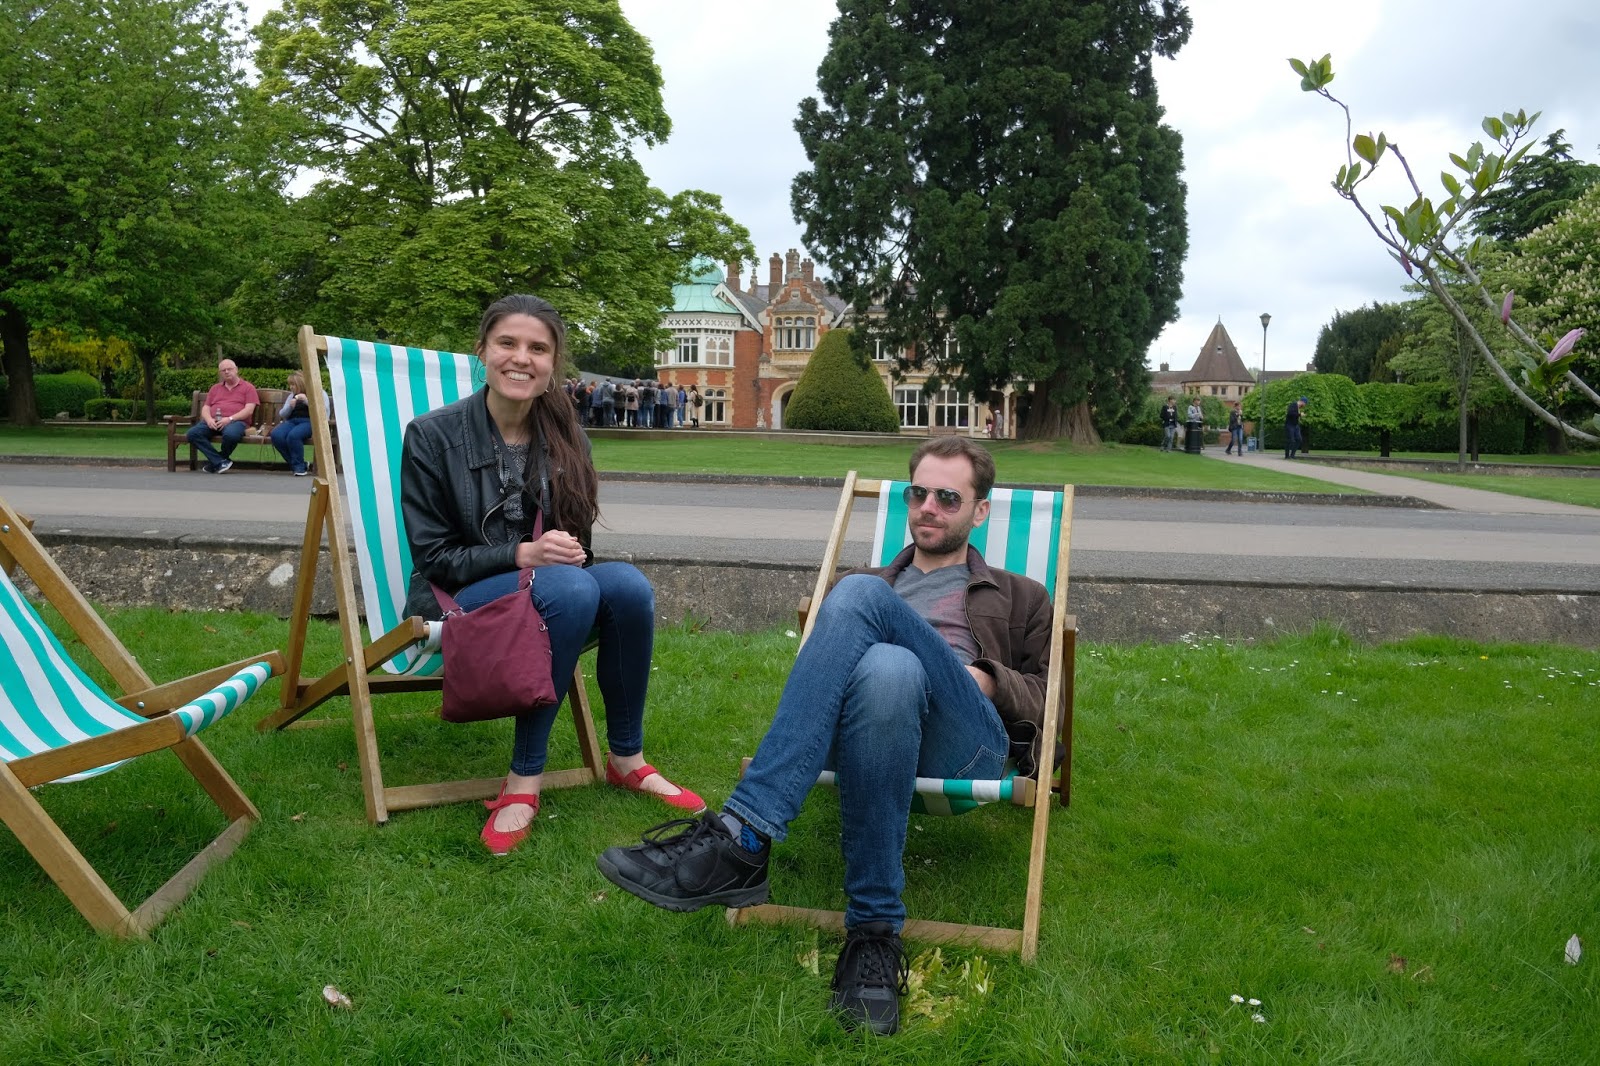 Deckchairs at Bletchley Park